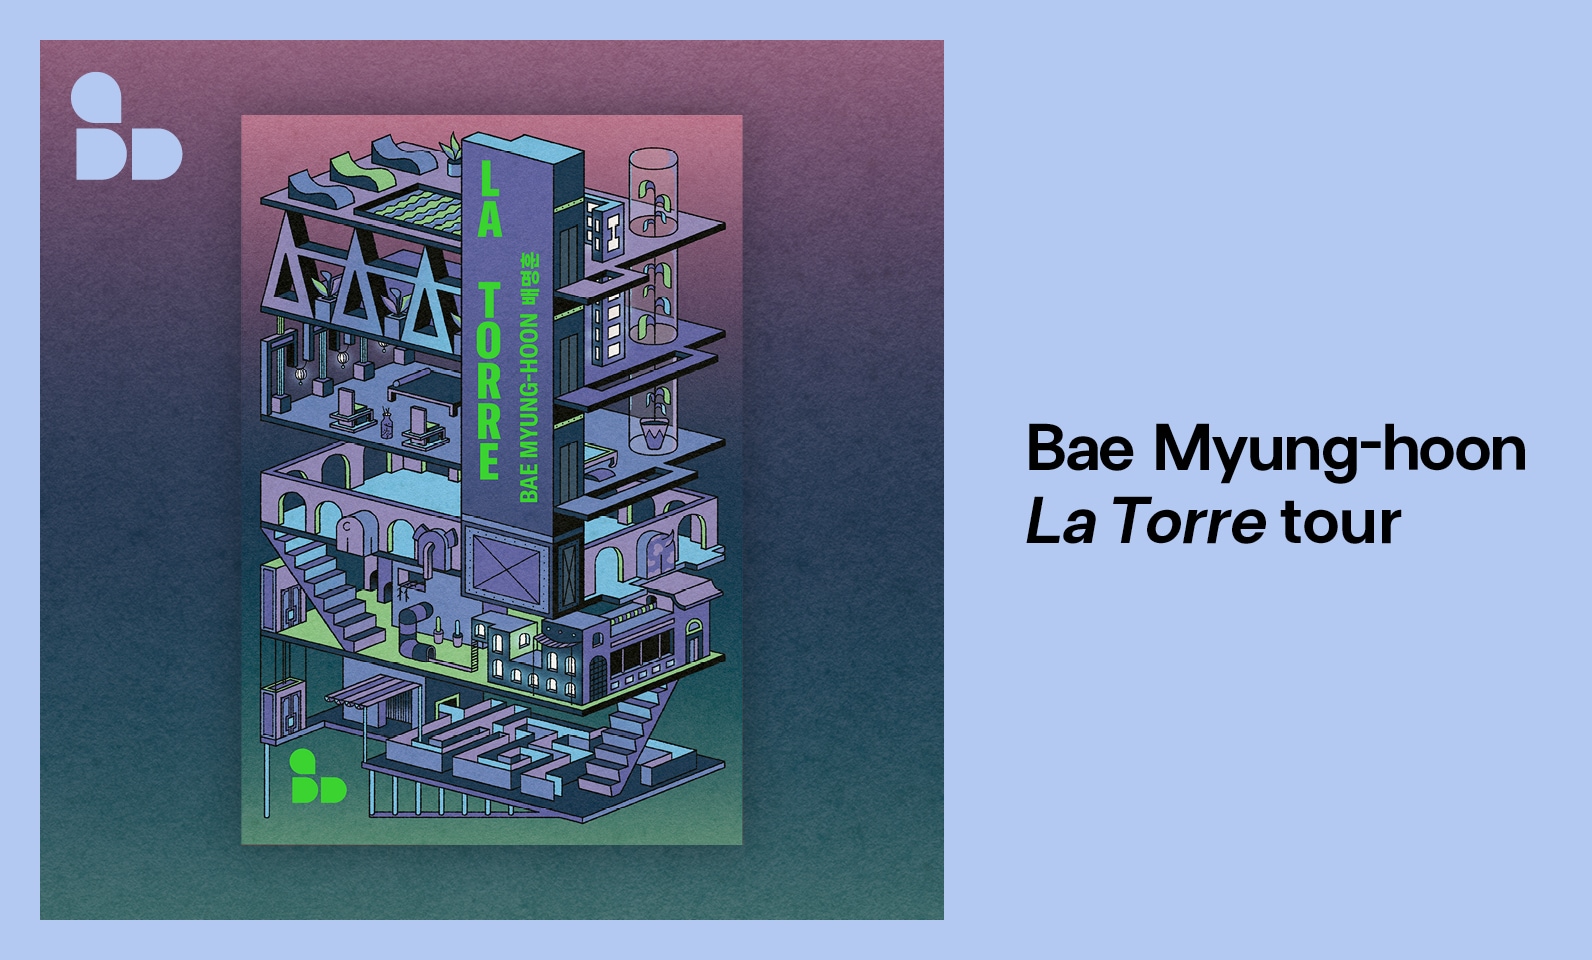 Featured image for “La Torre | Bae Myung-hoon in tour”